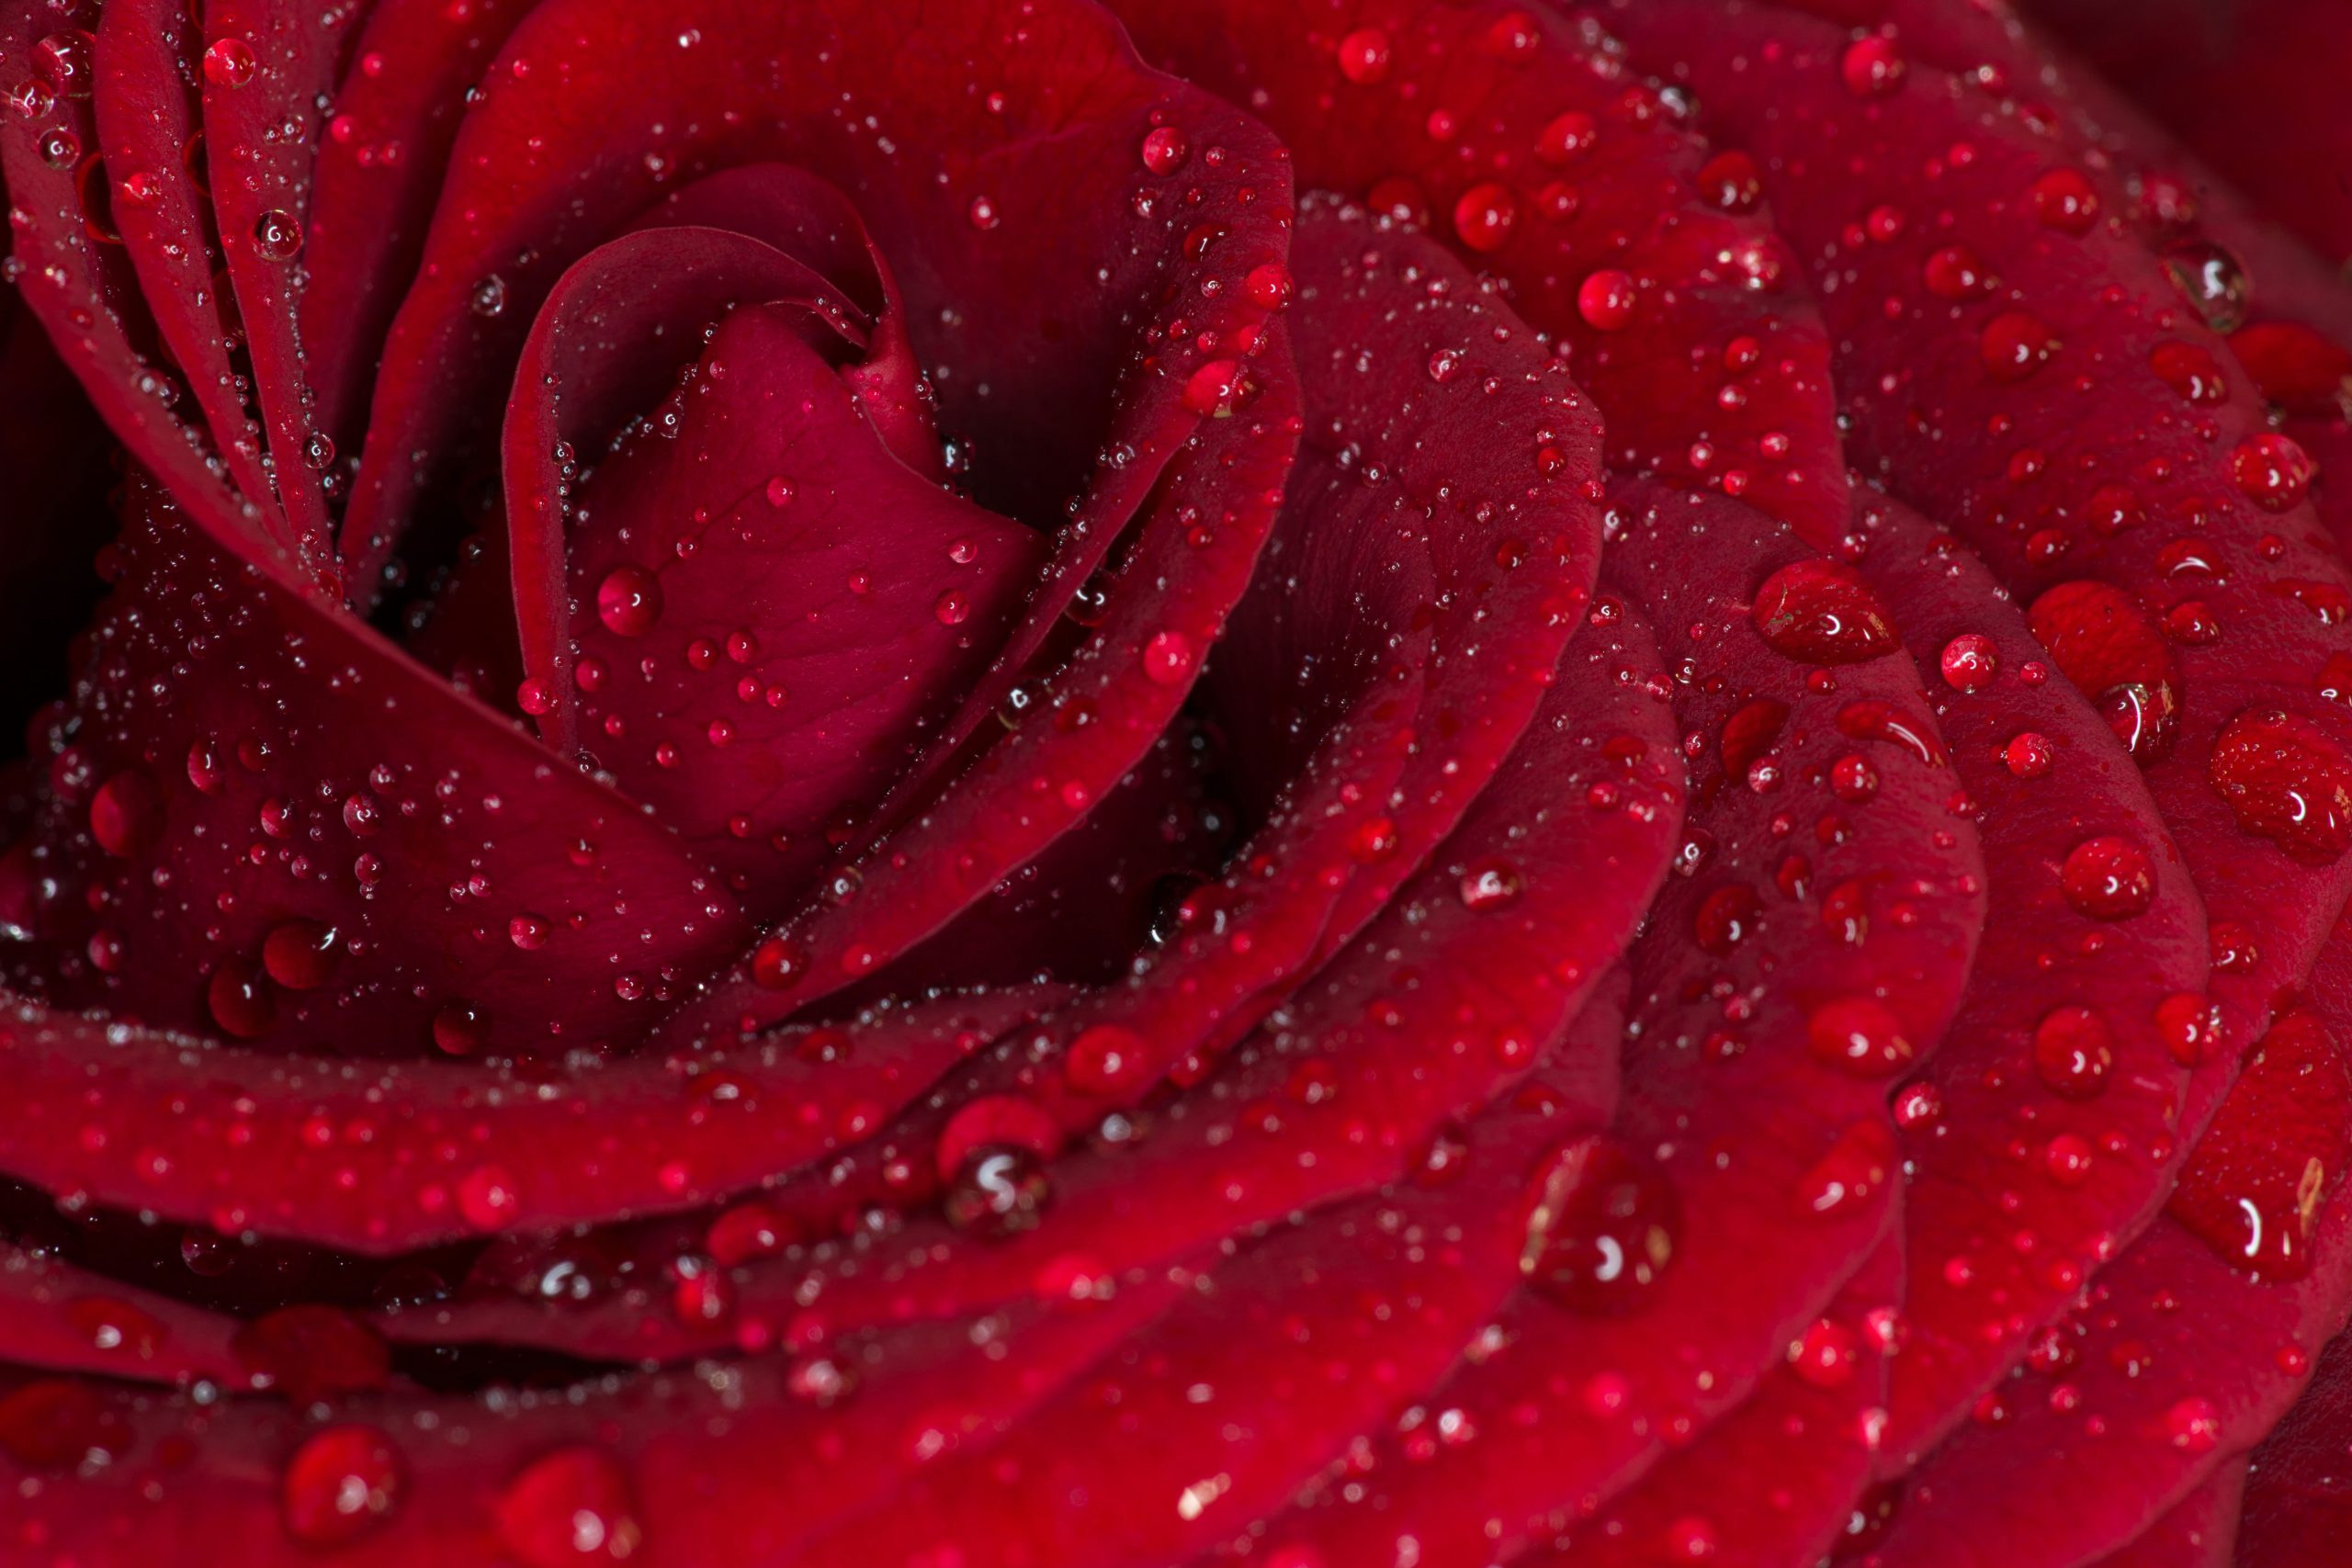 Rose Flower With Water Drops Wallpaper, Rose, Red Rose - Wallpaperforu